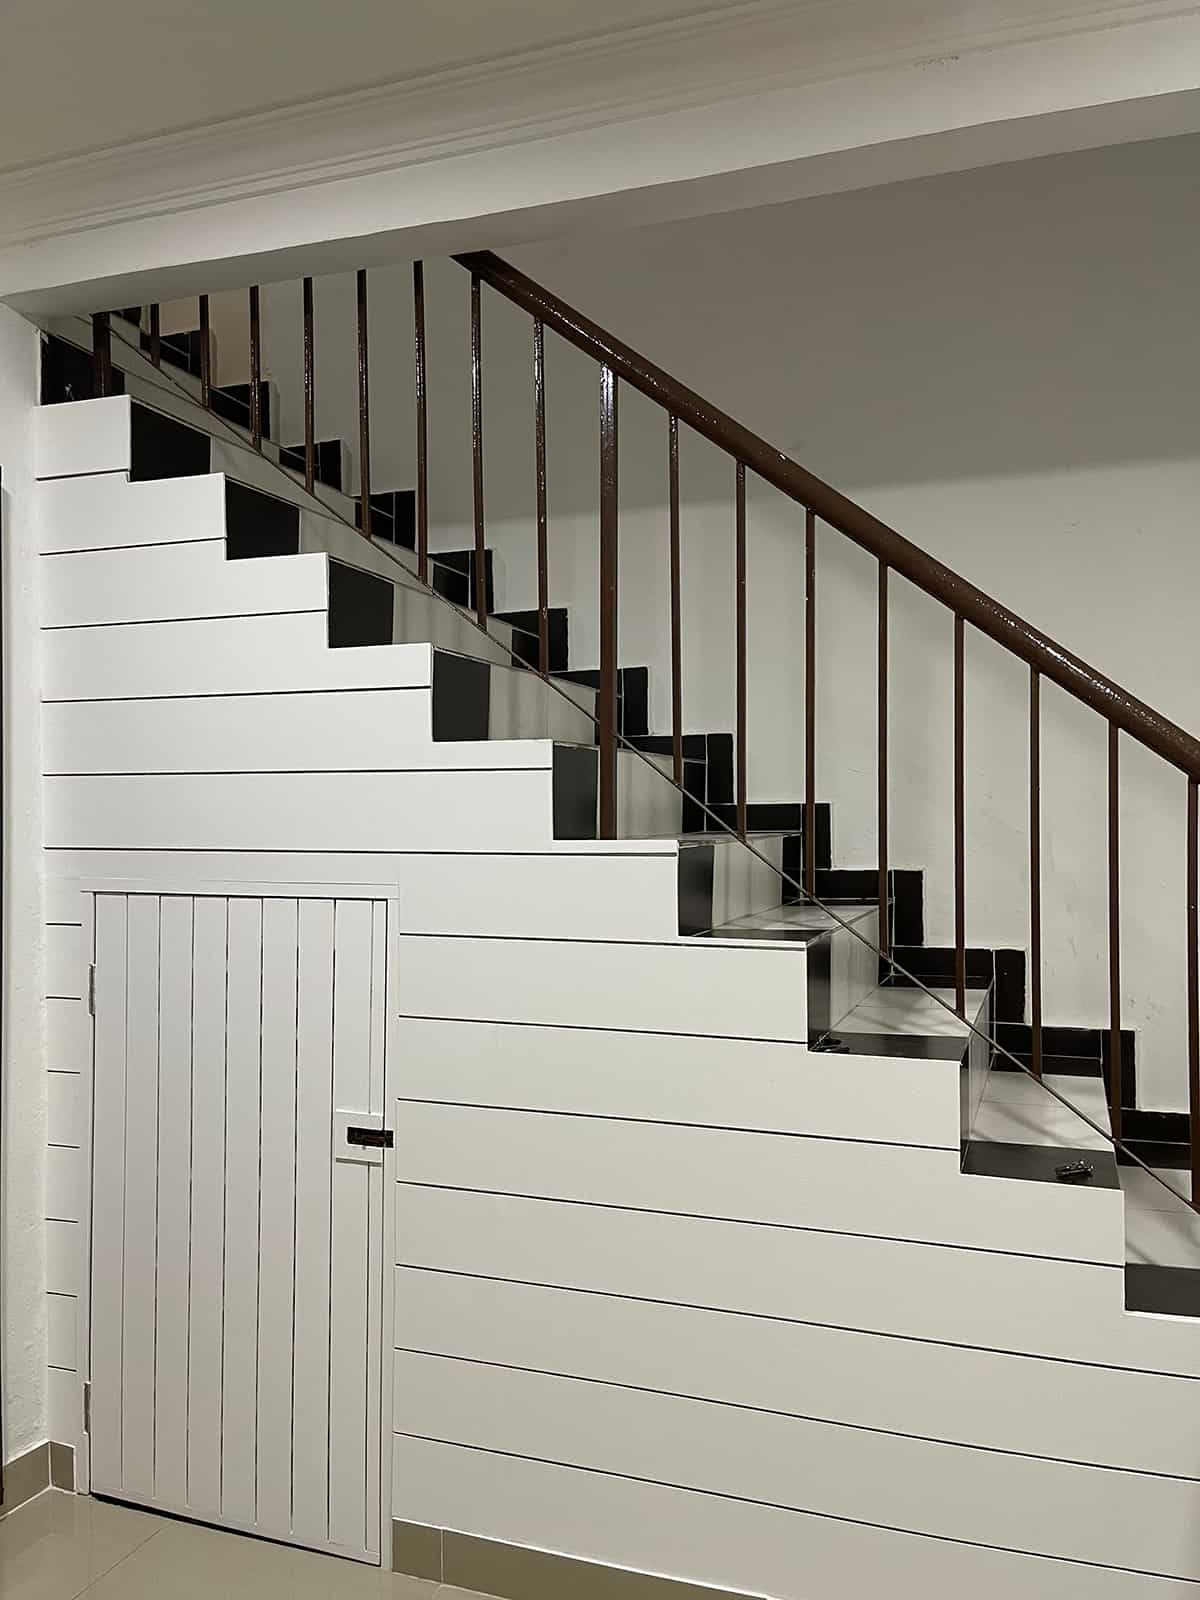 Shiplap to Highlight the Staircase Walls